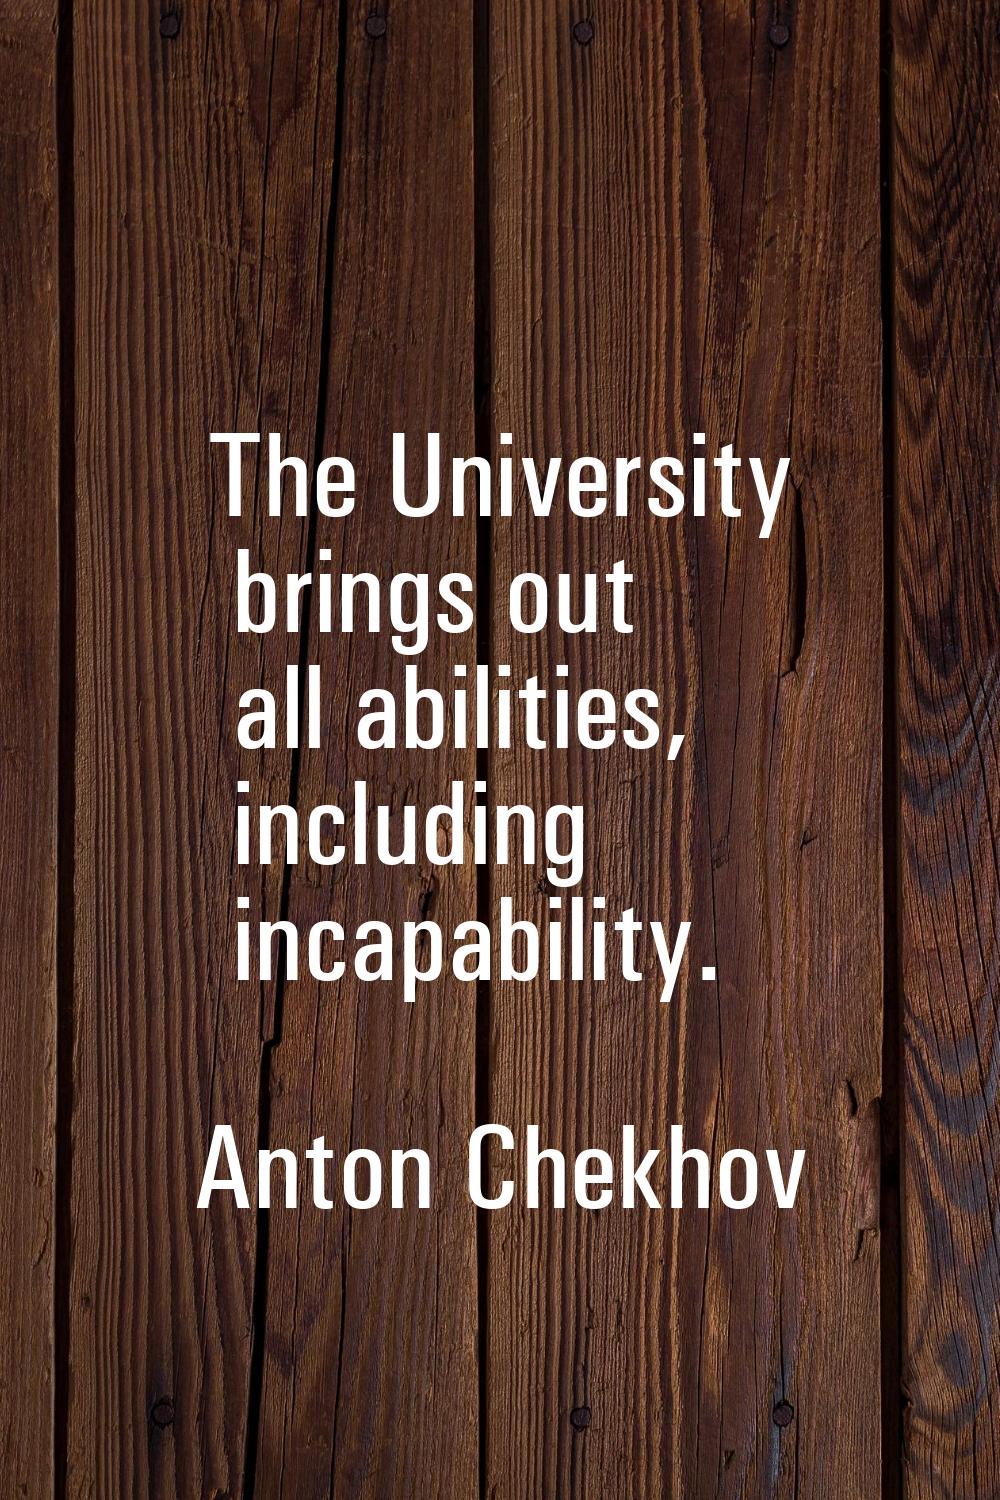 The University brings out all abilities, including incapability.